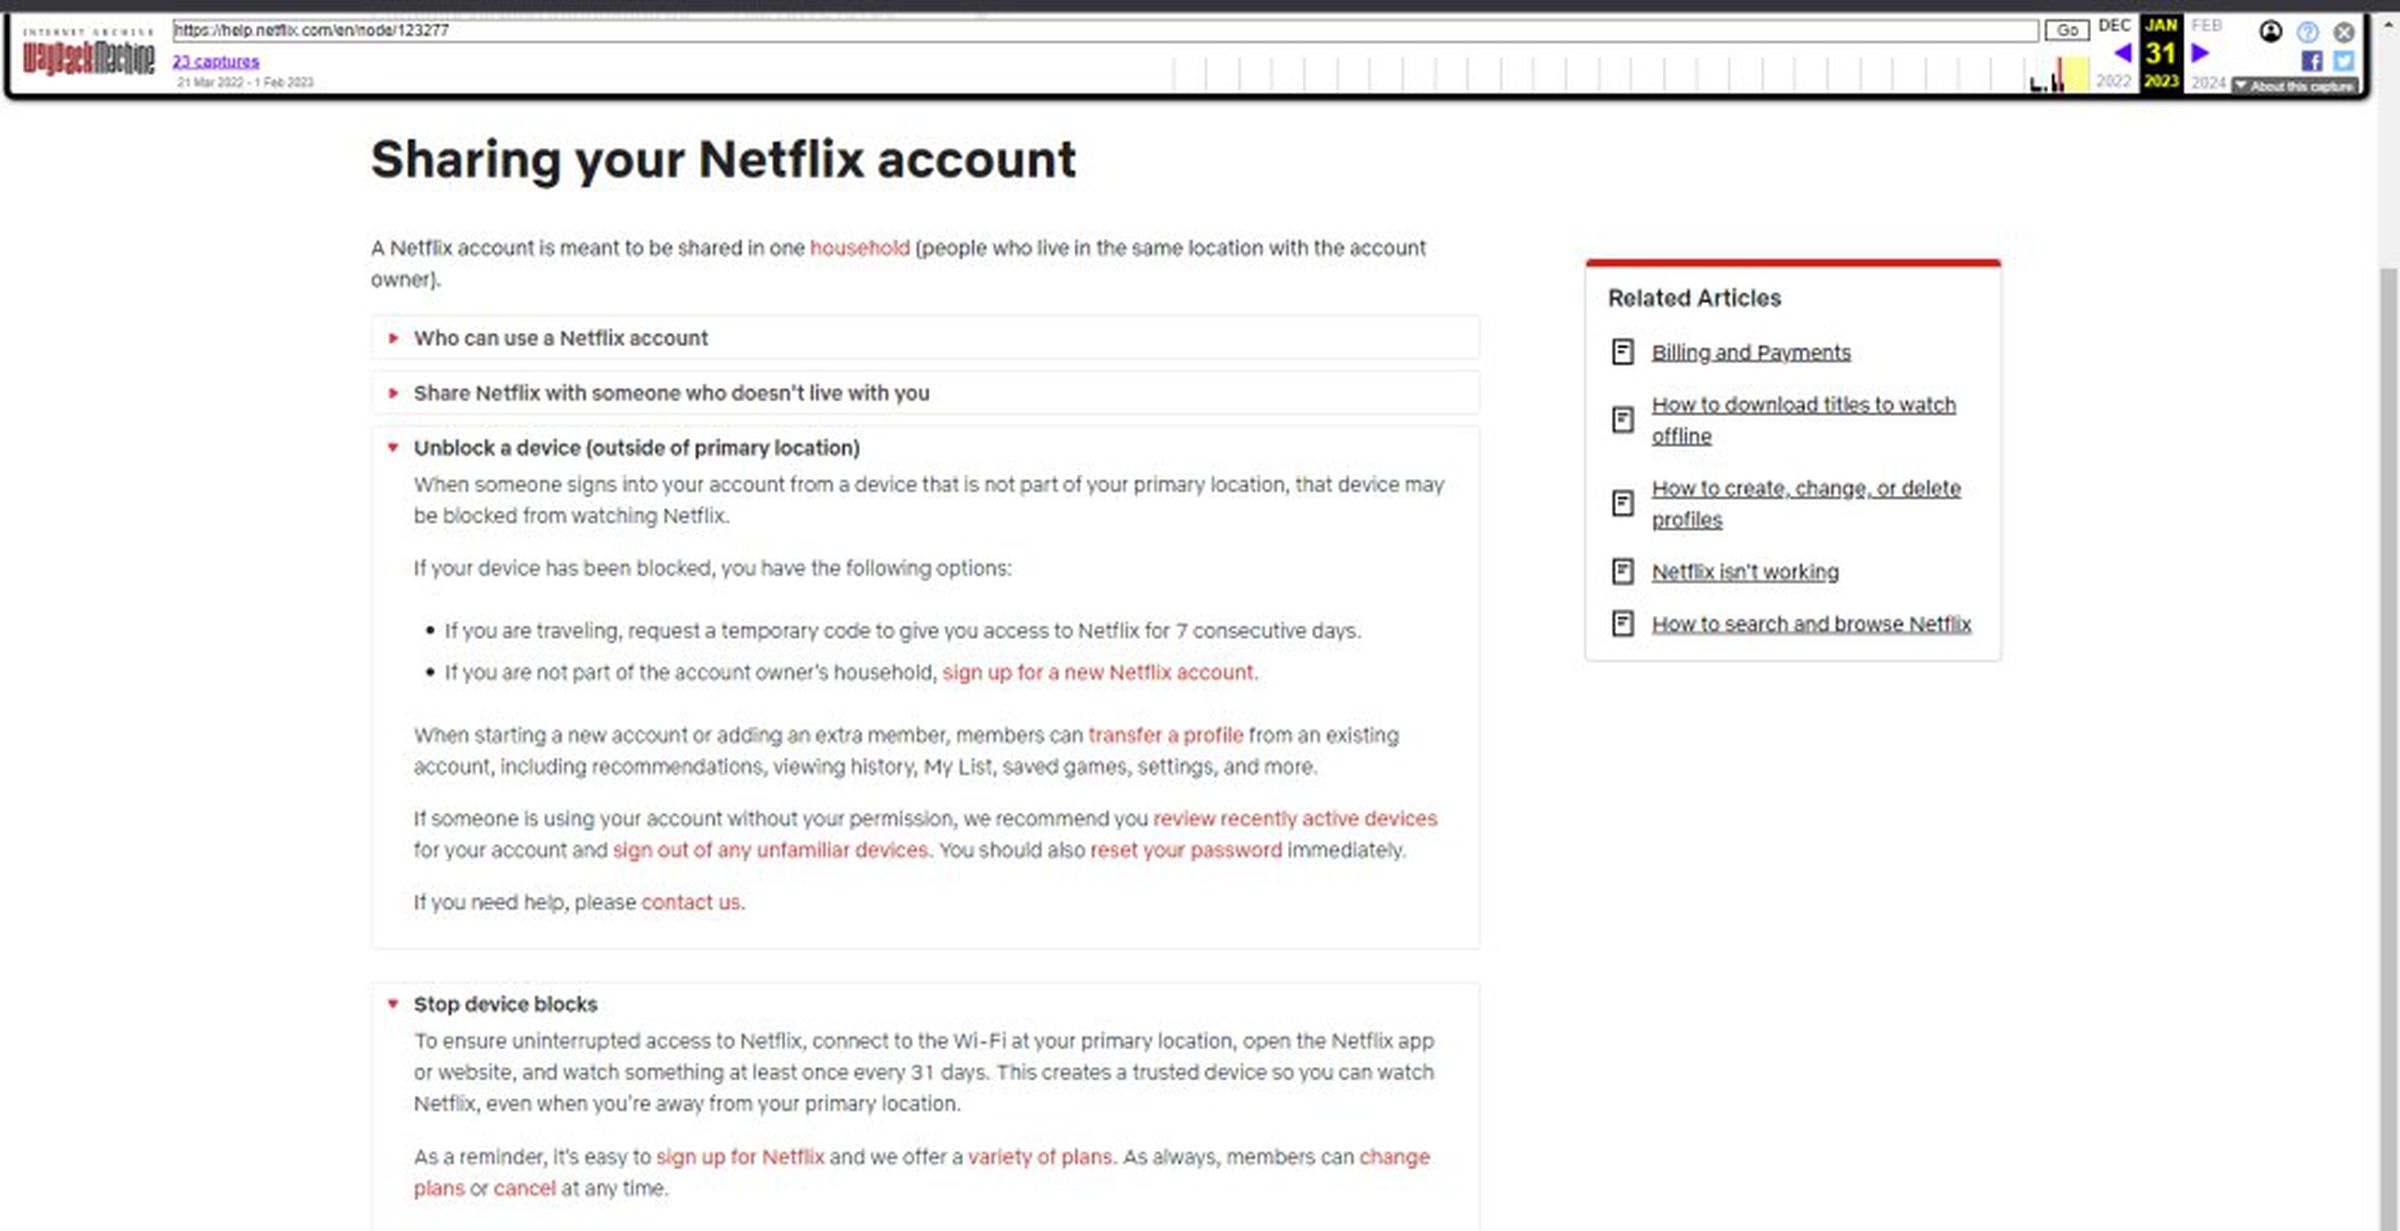 The archived support page says Netflix could block a device “that is not part of your primary location.”